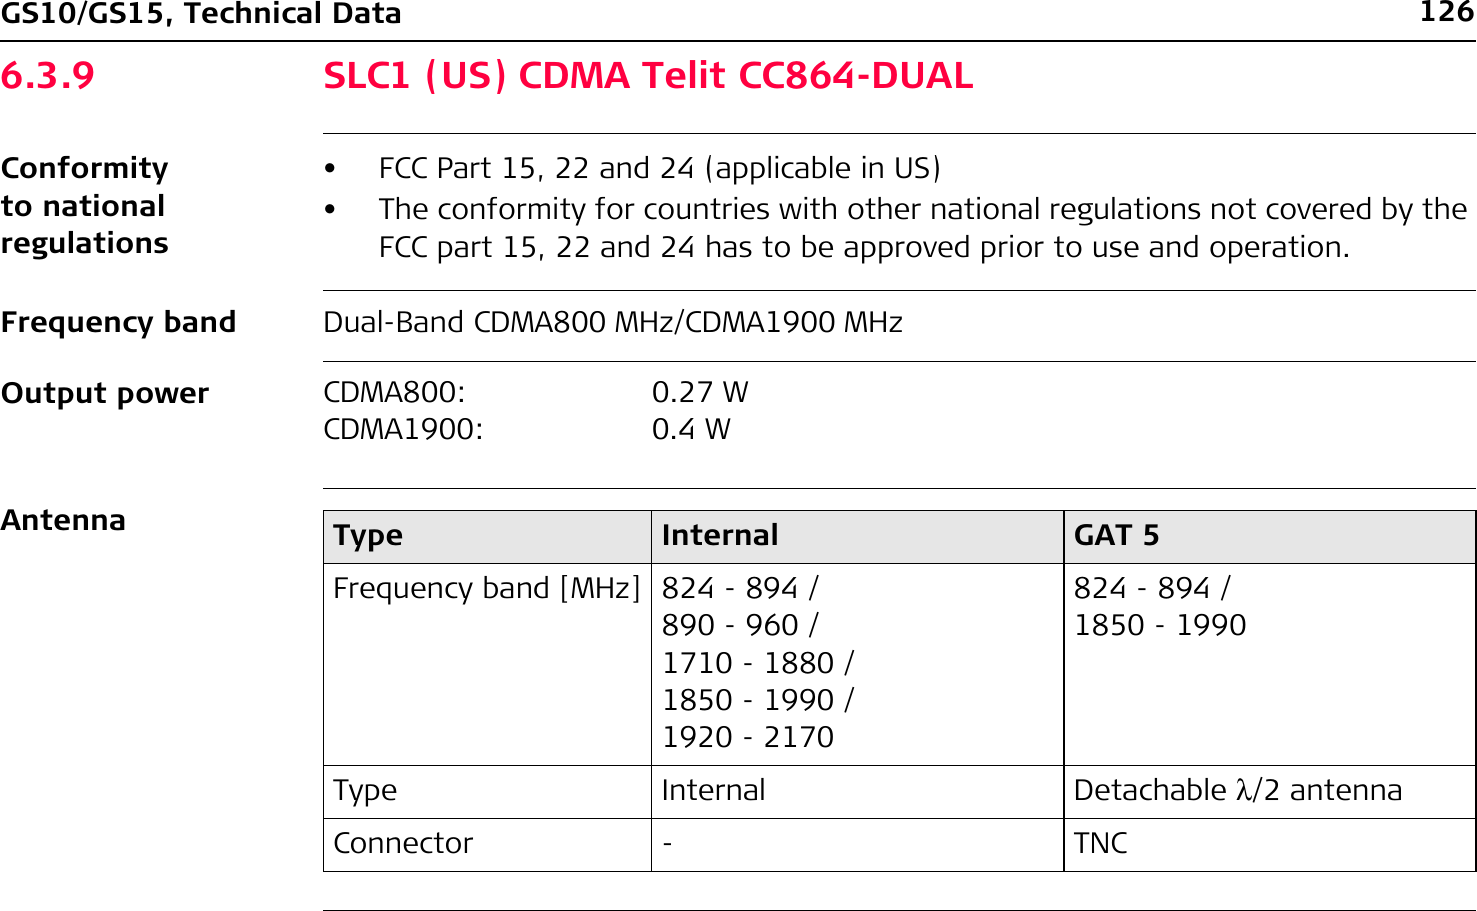 126GS10/GS15, Technical Data6.3.9 SLC1 (US) CDMA Telit CC864-DUALConformity to national regulations• FCC Part 15, 22 and 24 (applicable in US)• The conformity for countries with other national regulations not covered by the FCC part 15, 22 and 24 has to be approved prior to use and operation.Frequency band Dual-Band CDMA800 MHz/CDMA1900 MHzOutput powerAntennaCDMA800: 0.27 WCDMA1900: 0.4 WType Internal GAT 5Frequency band [MHz] 824 - 894 /890 - 960 /1710 - 1880 /1850 - 1990 /1920 - 2170824 - 894 /1850 - 1990Type Internal Detachable λ/2 antennaConnector - TNC